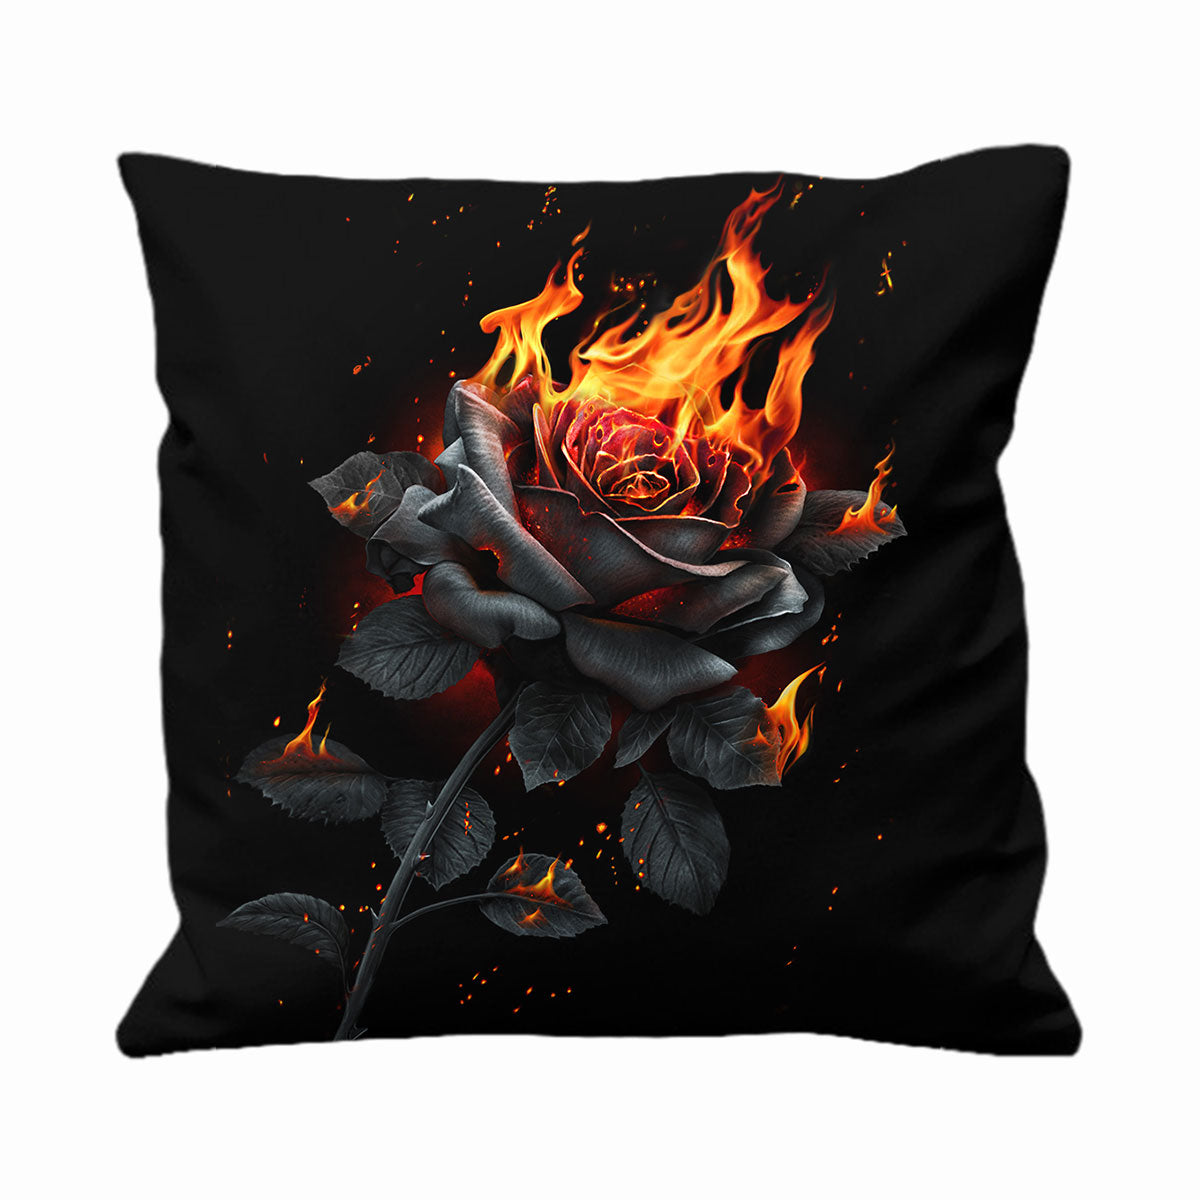 FLAMING ROSE - Coussin carré